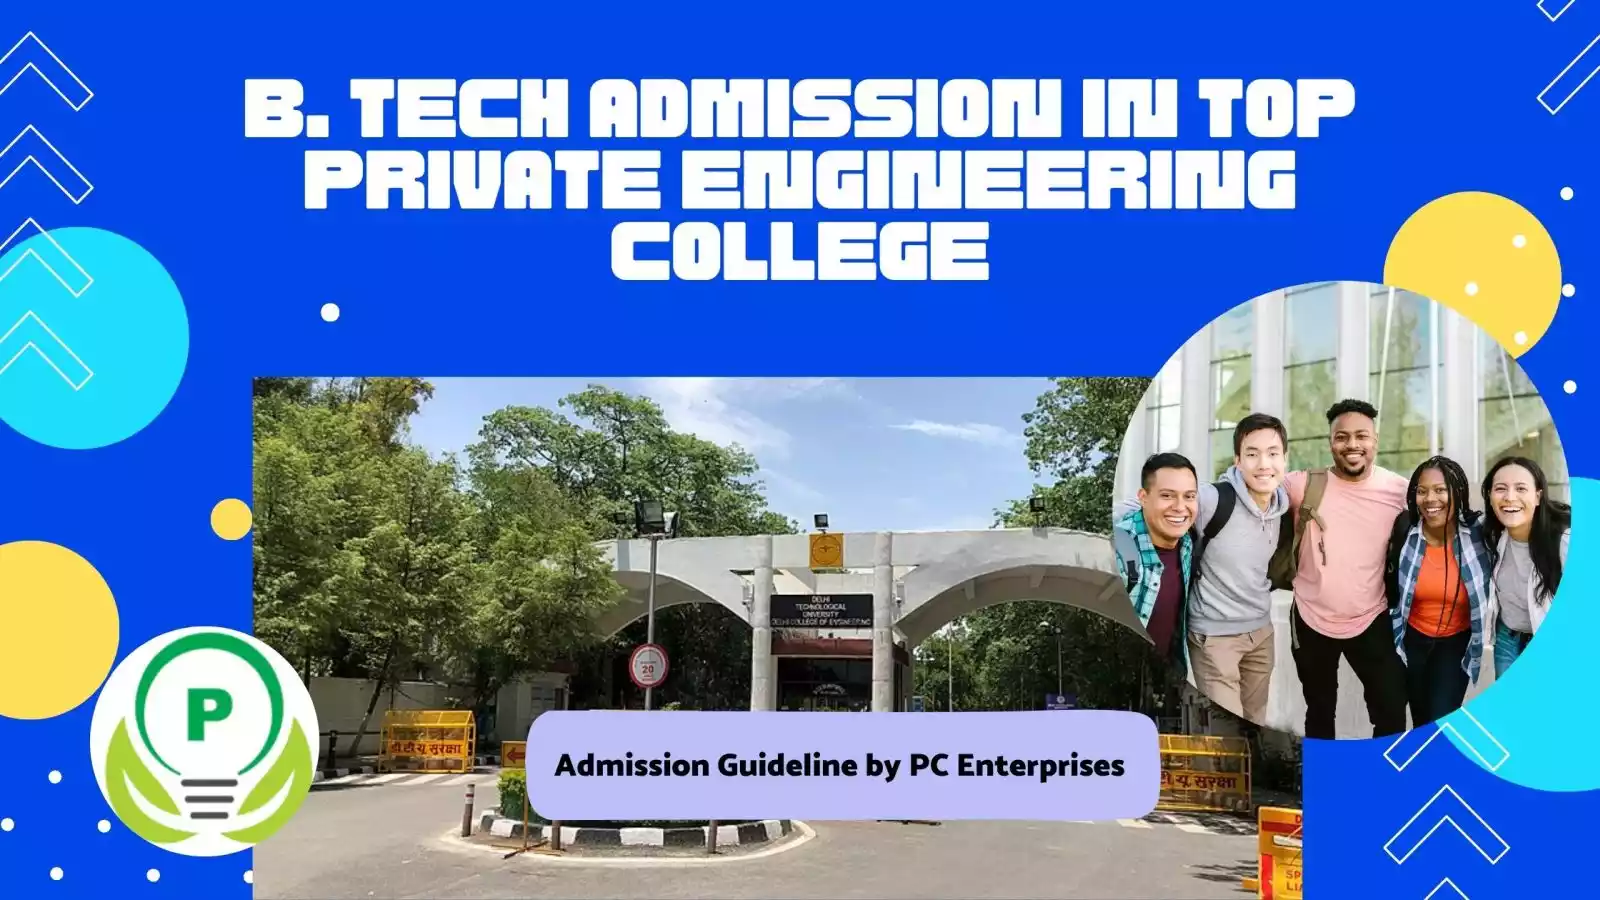 B. Tech Admission in Top Private Engineering College